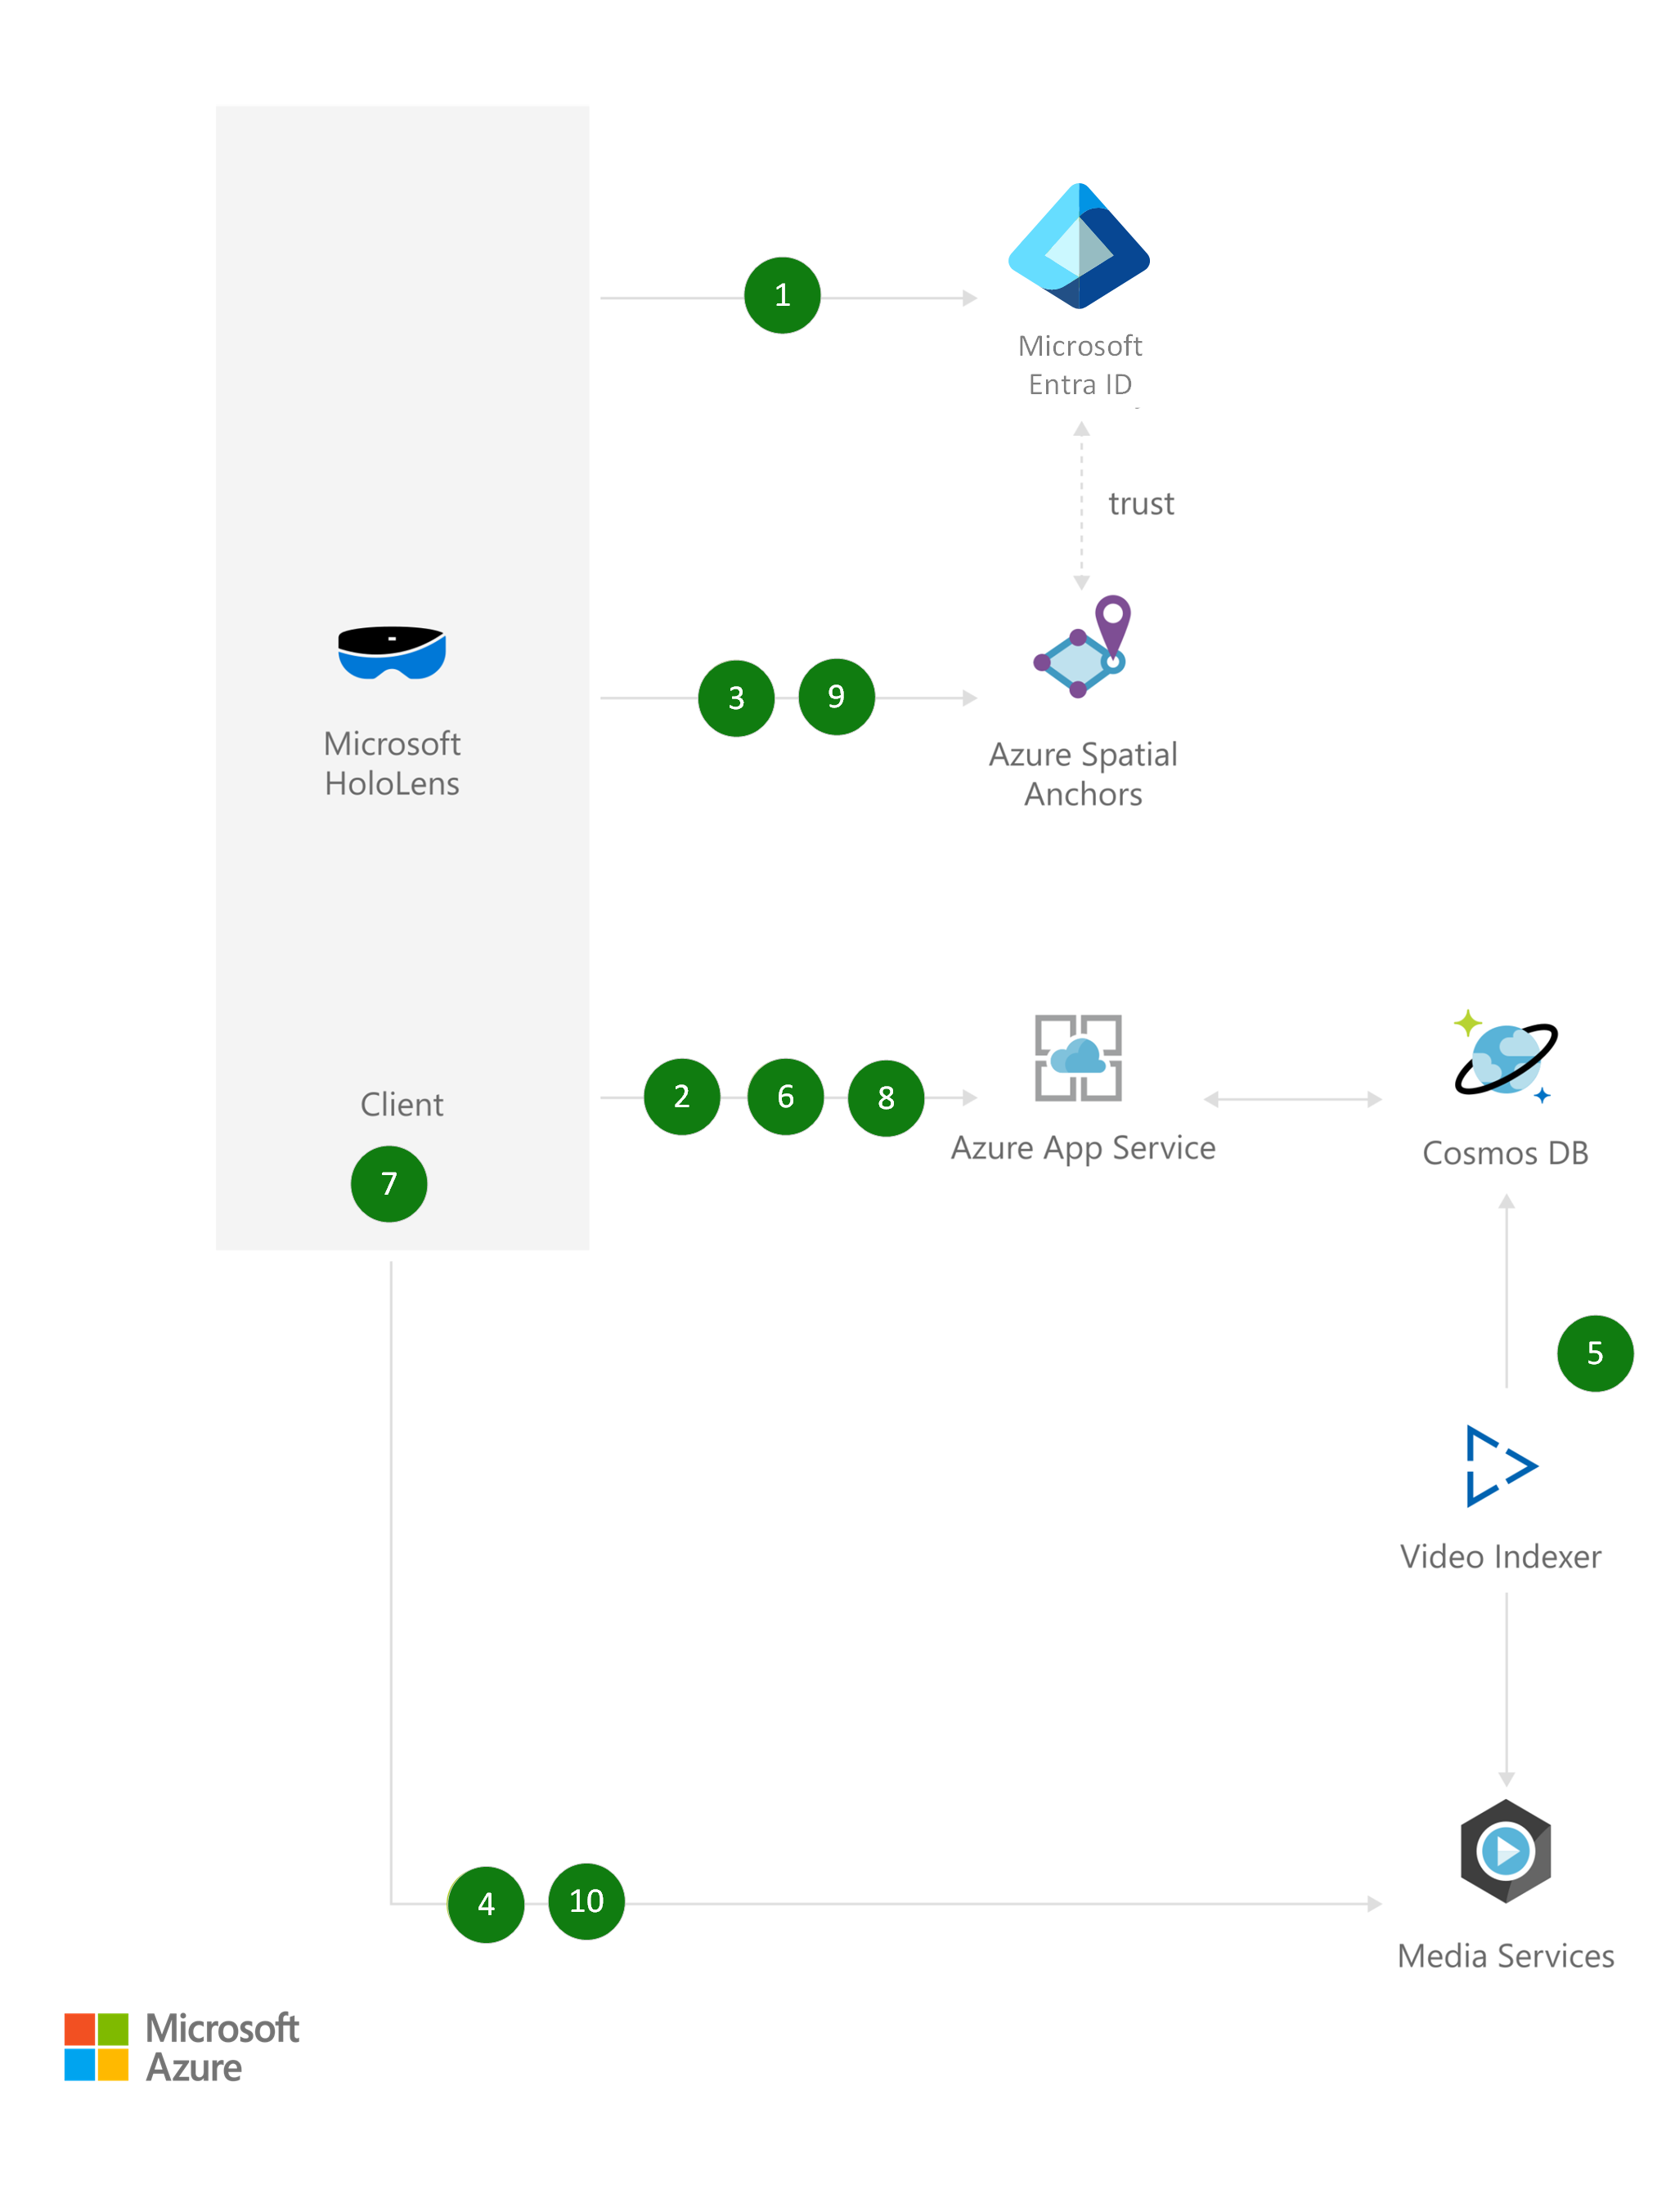 Architecture diagram shows using Azure AD to authenticate with Microsoft Hololens.